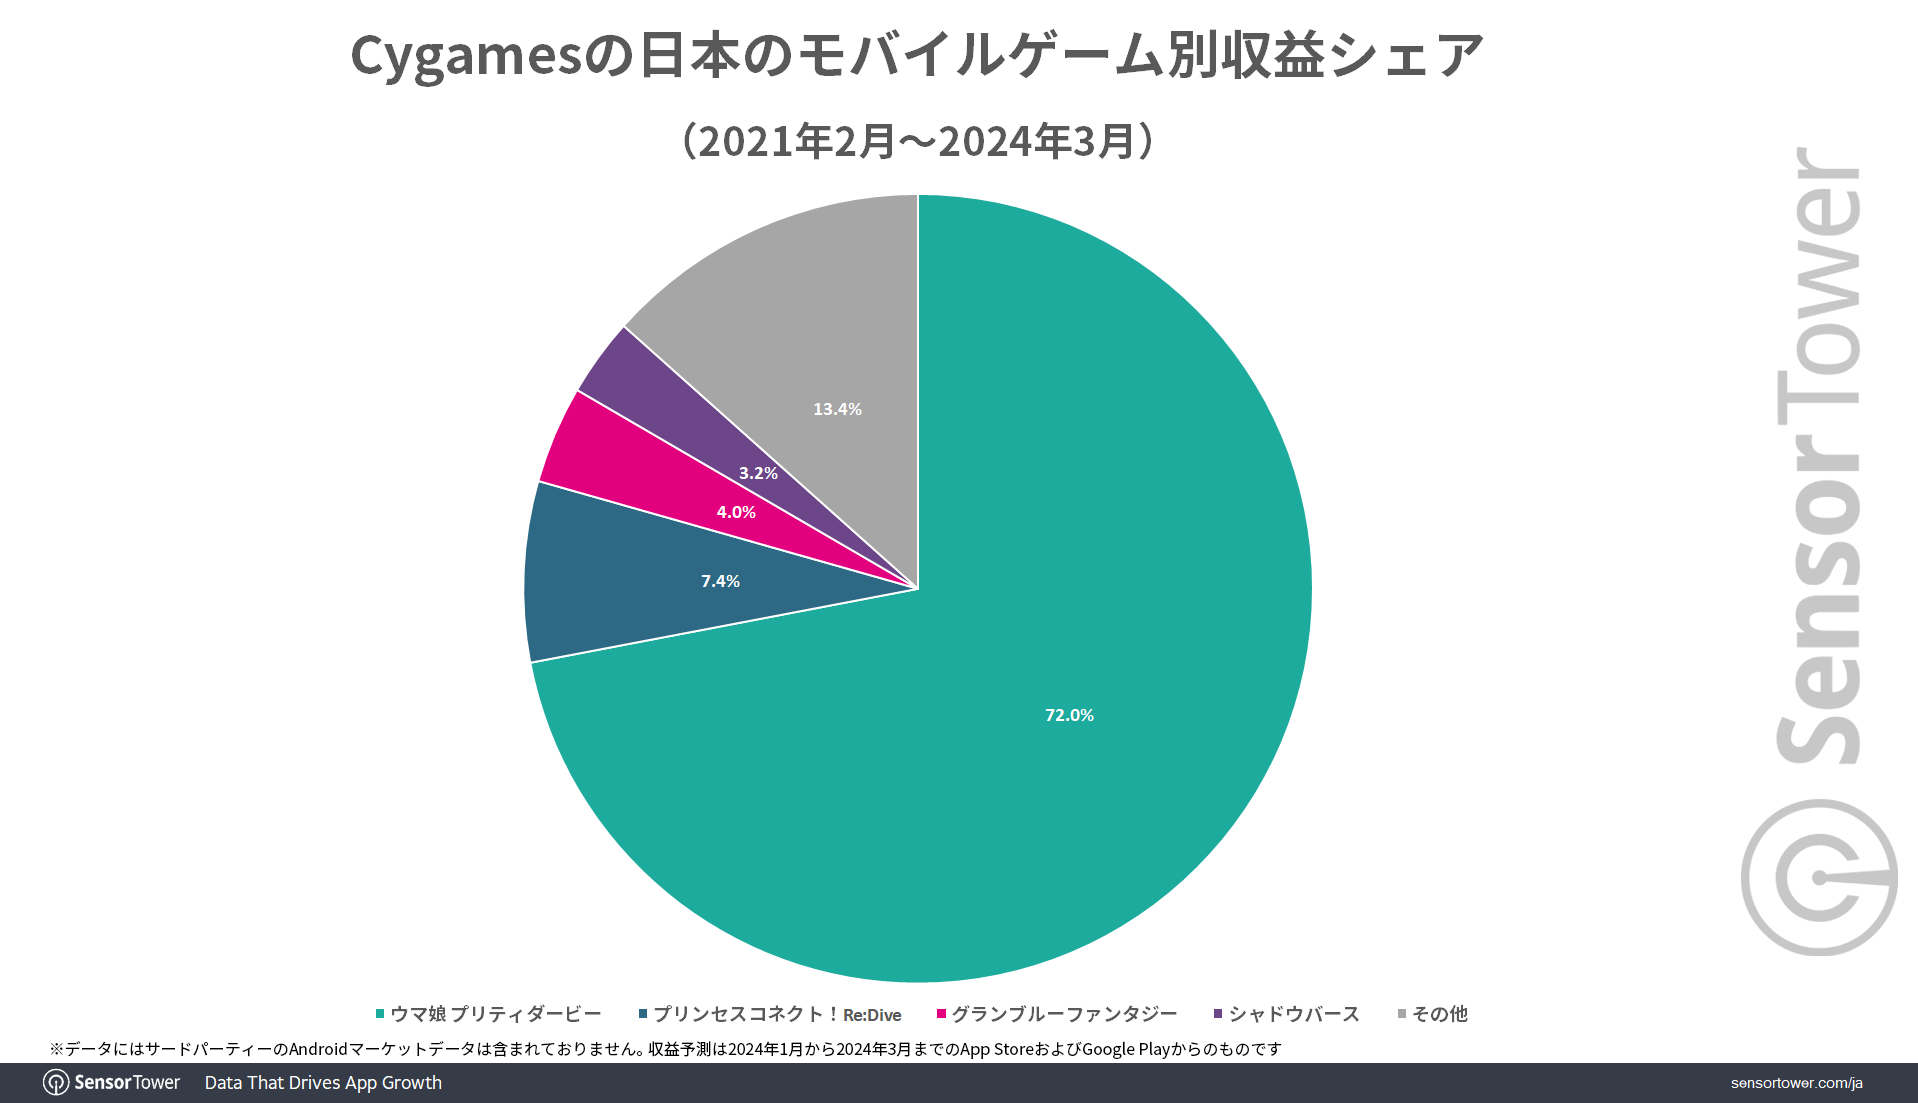 Revenue-Share-by-Game-Cygames